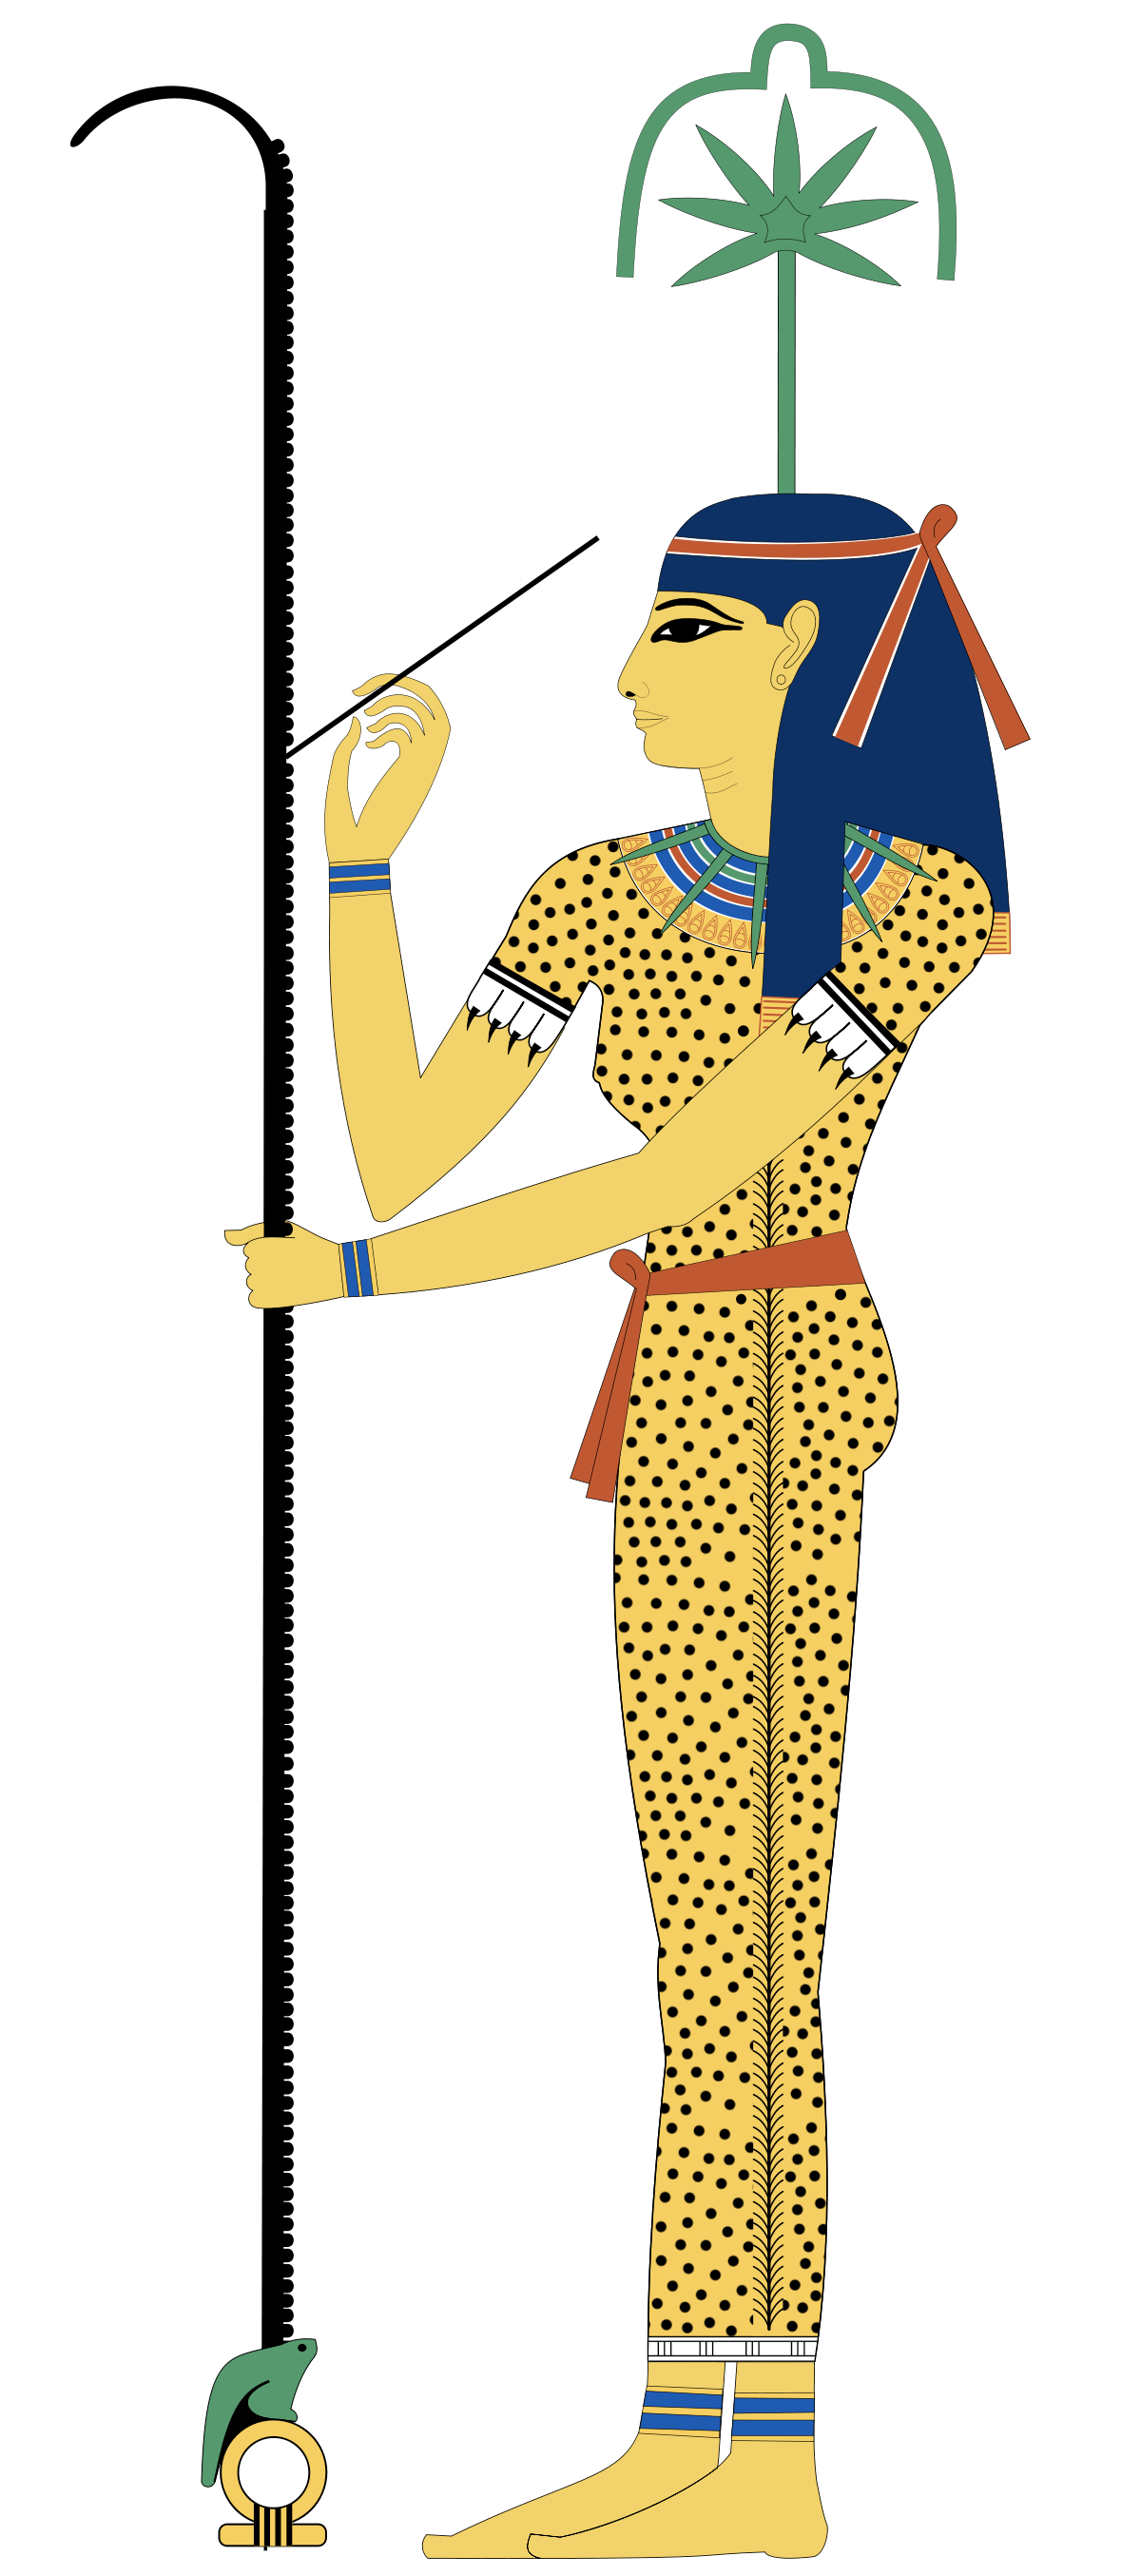 ***Seshat*** was the ancient Egyptian goddess of wisdom, knowledge and writing; also known as a scribe and record keeper. Source: [wikipedia](https://en.wikipedia.org/wiki/Seshat#/media/File:Seshat.svg)